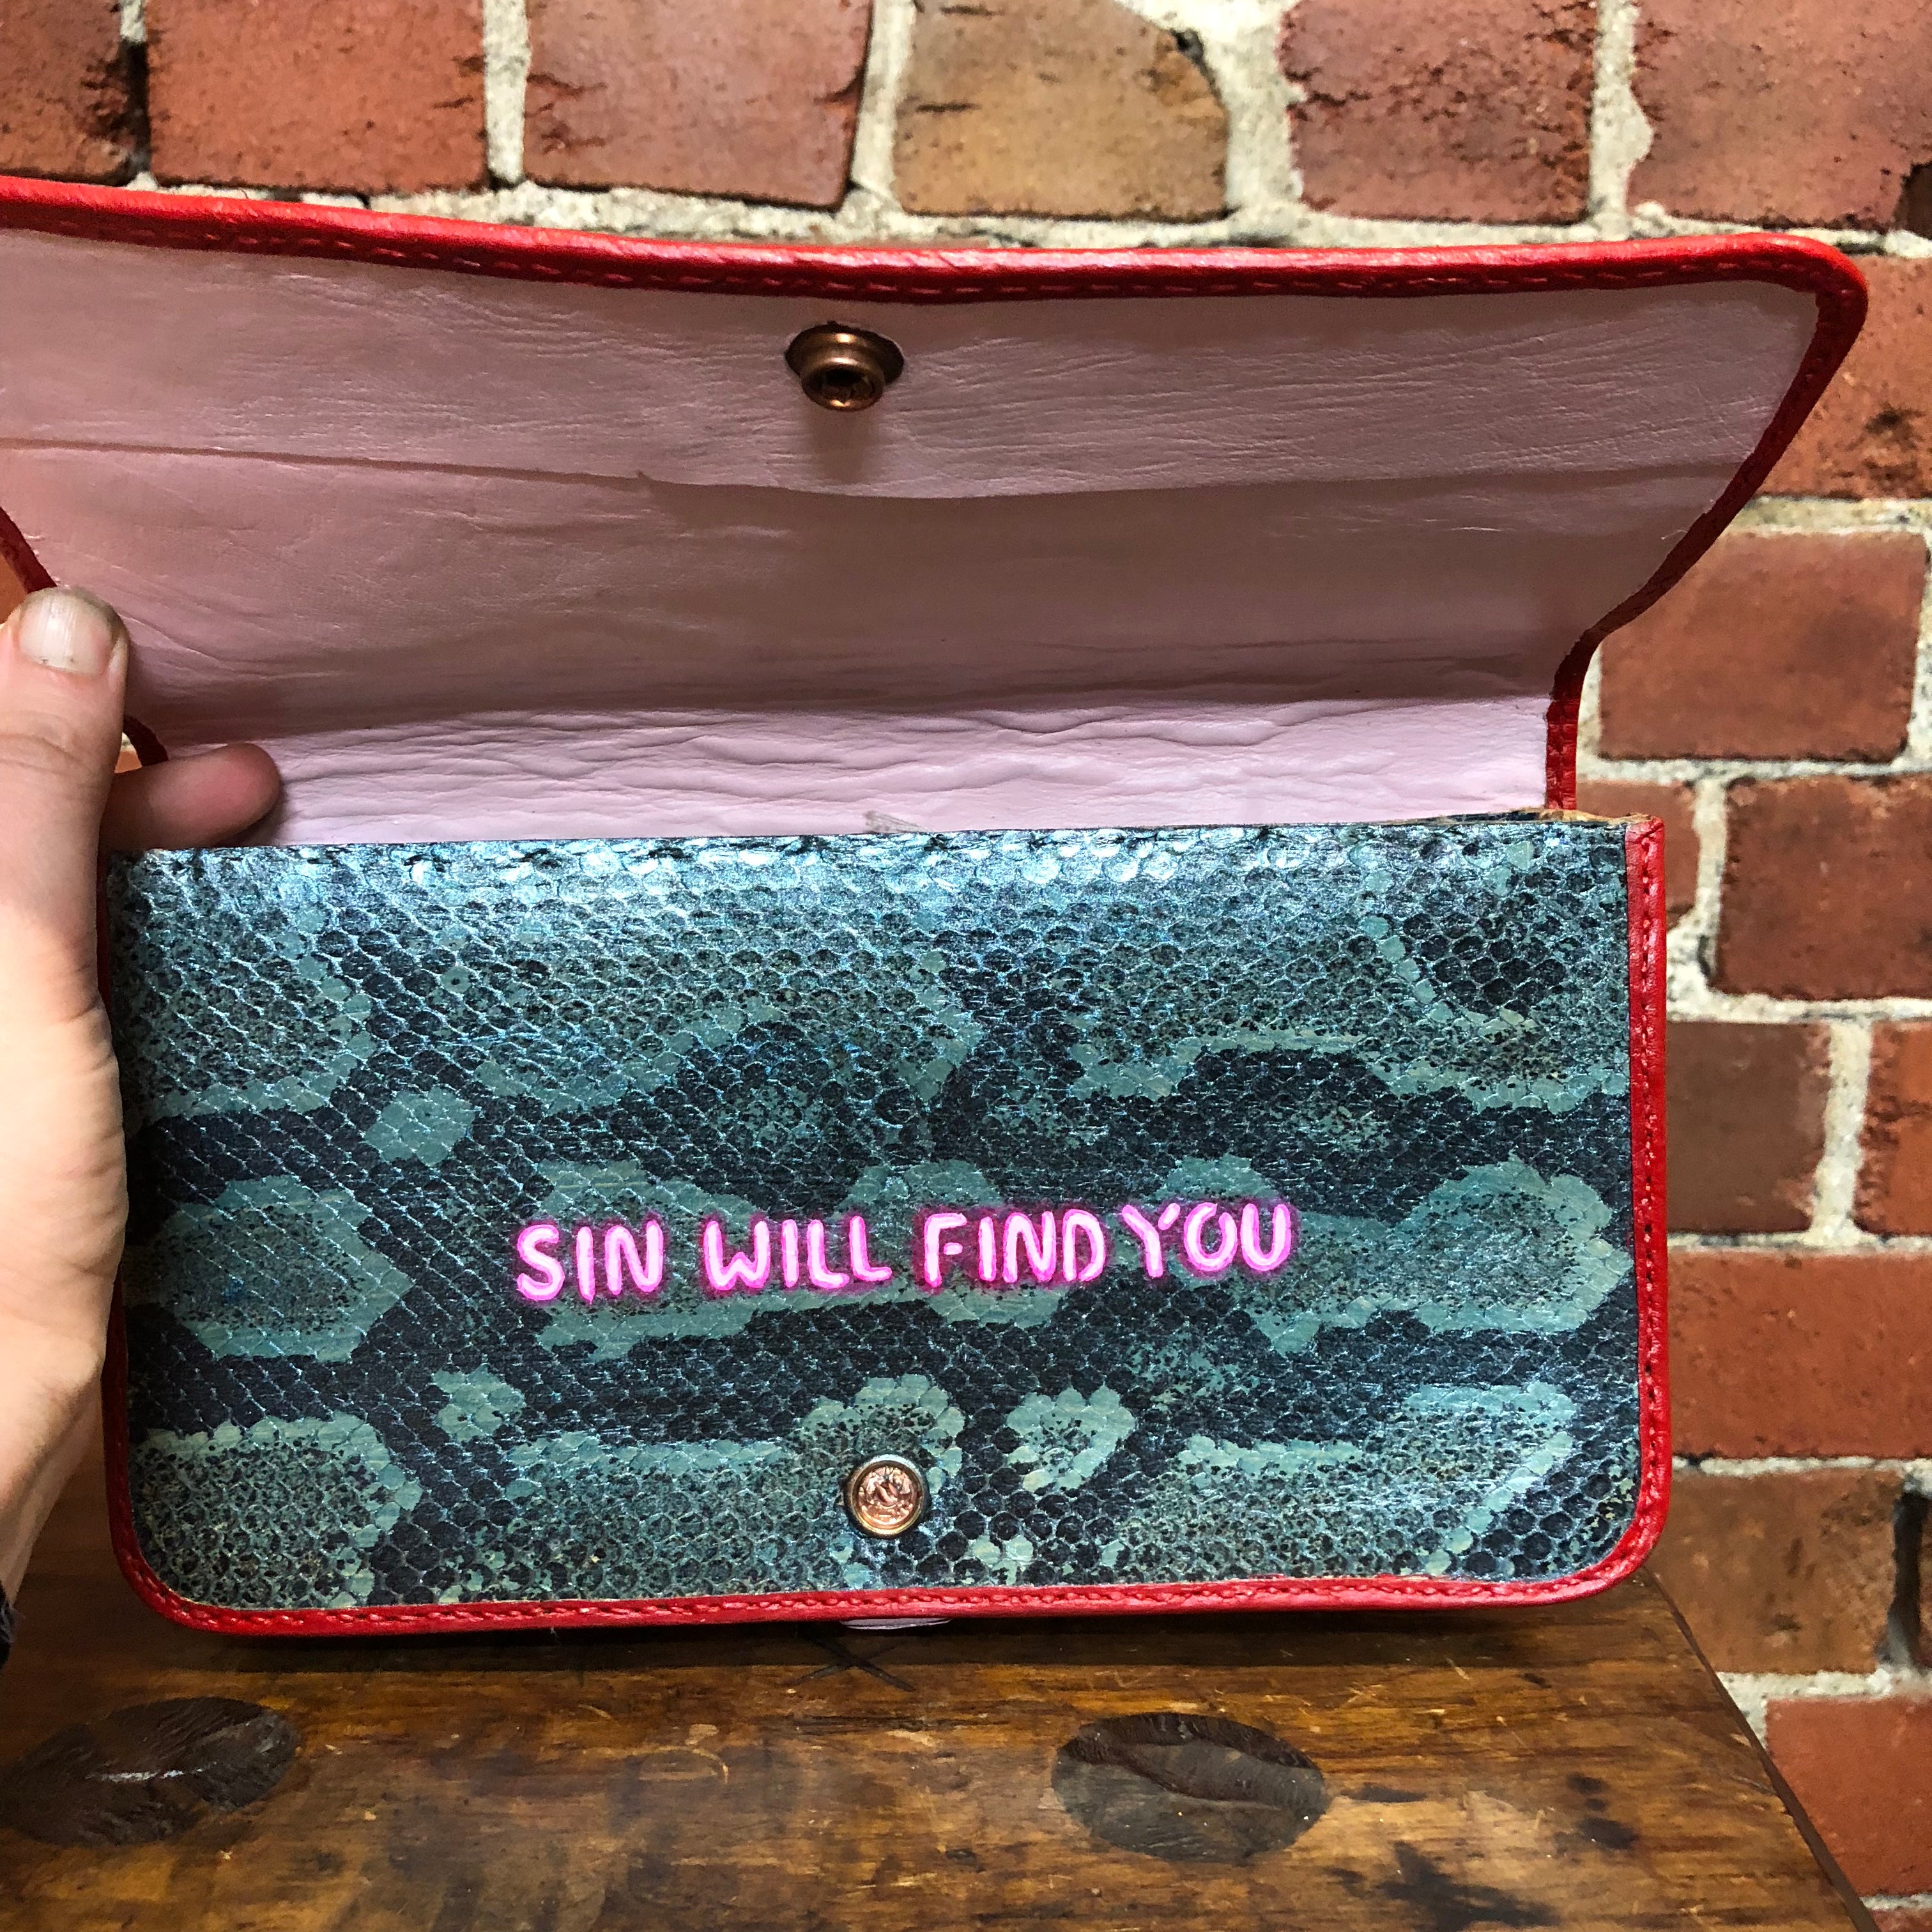 XOE HALL hand painted snakeskin bible clutch!